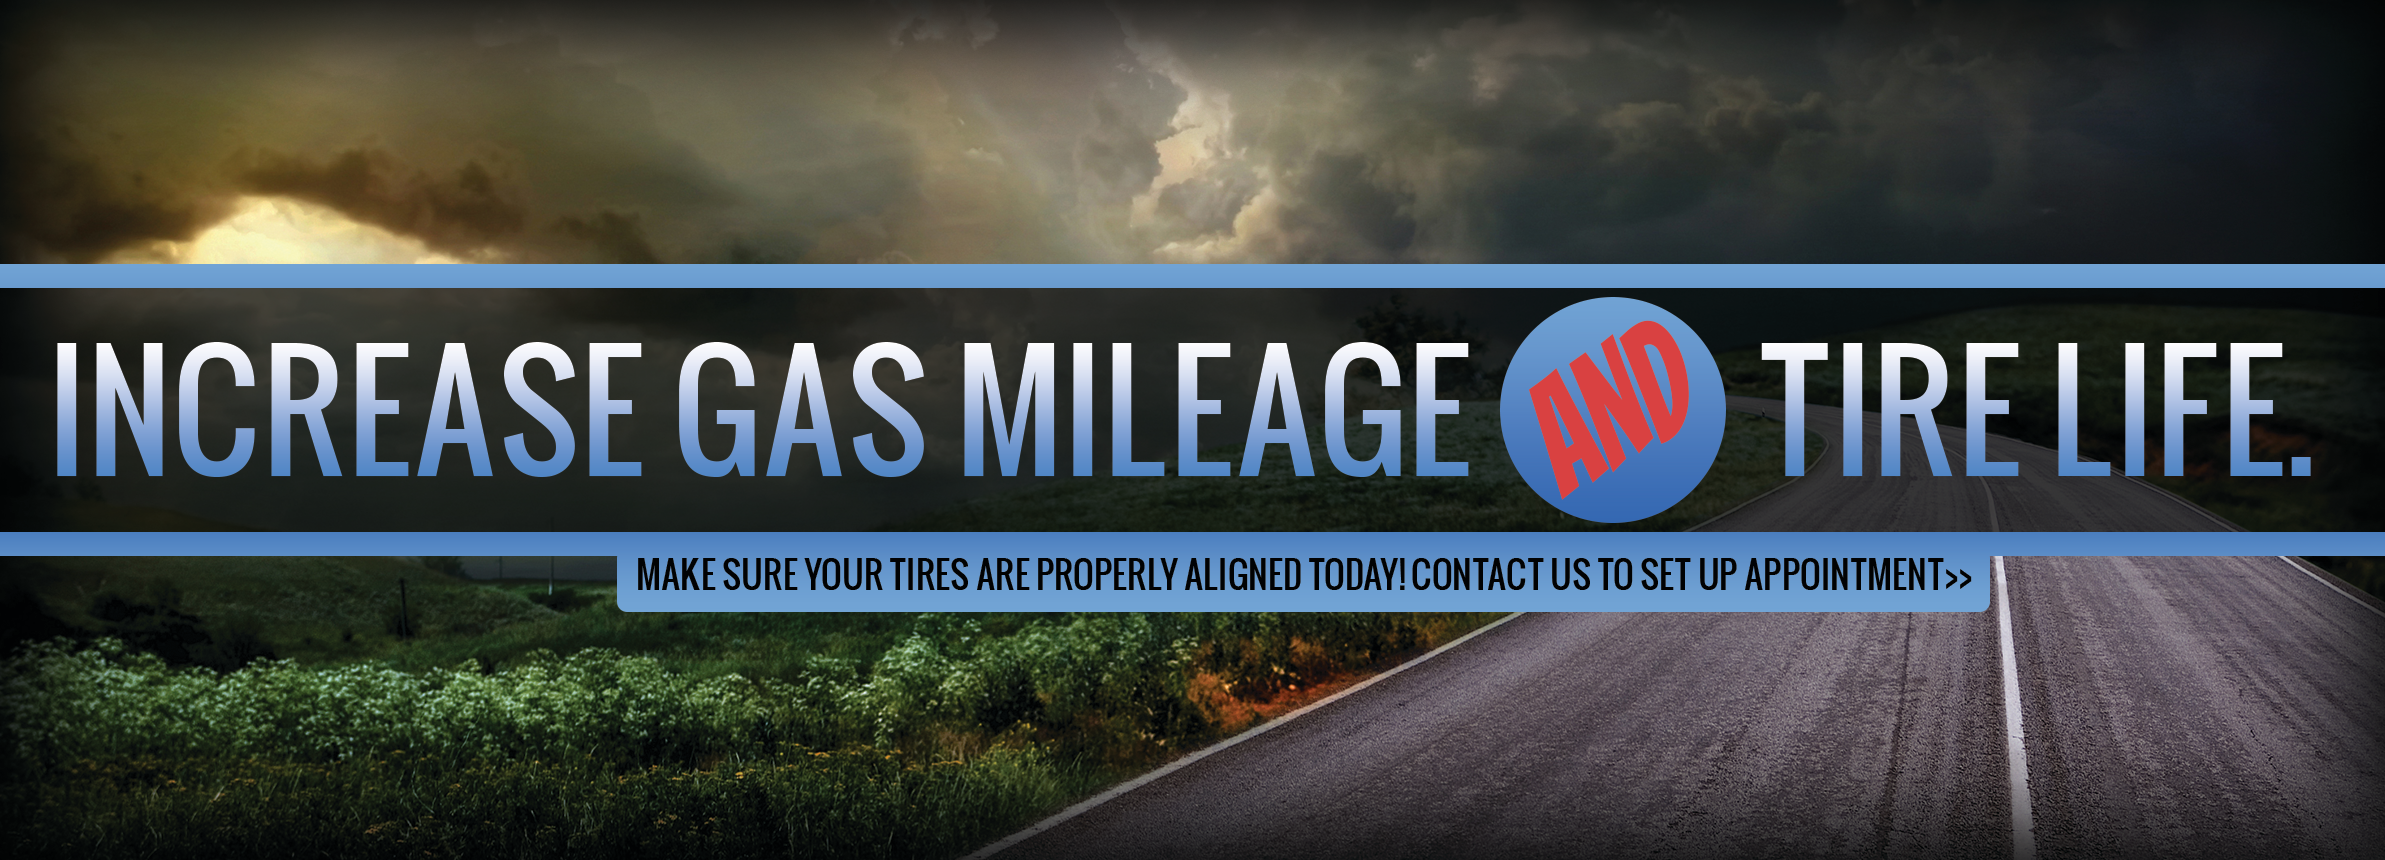 Increase Gas Mileage and Tire Life